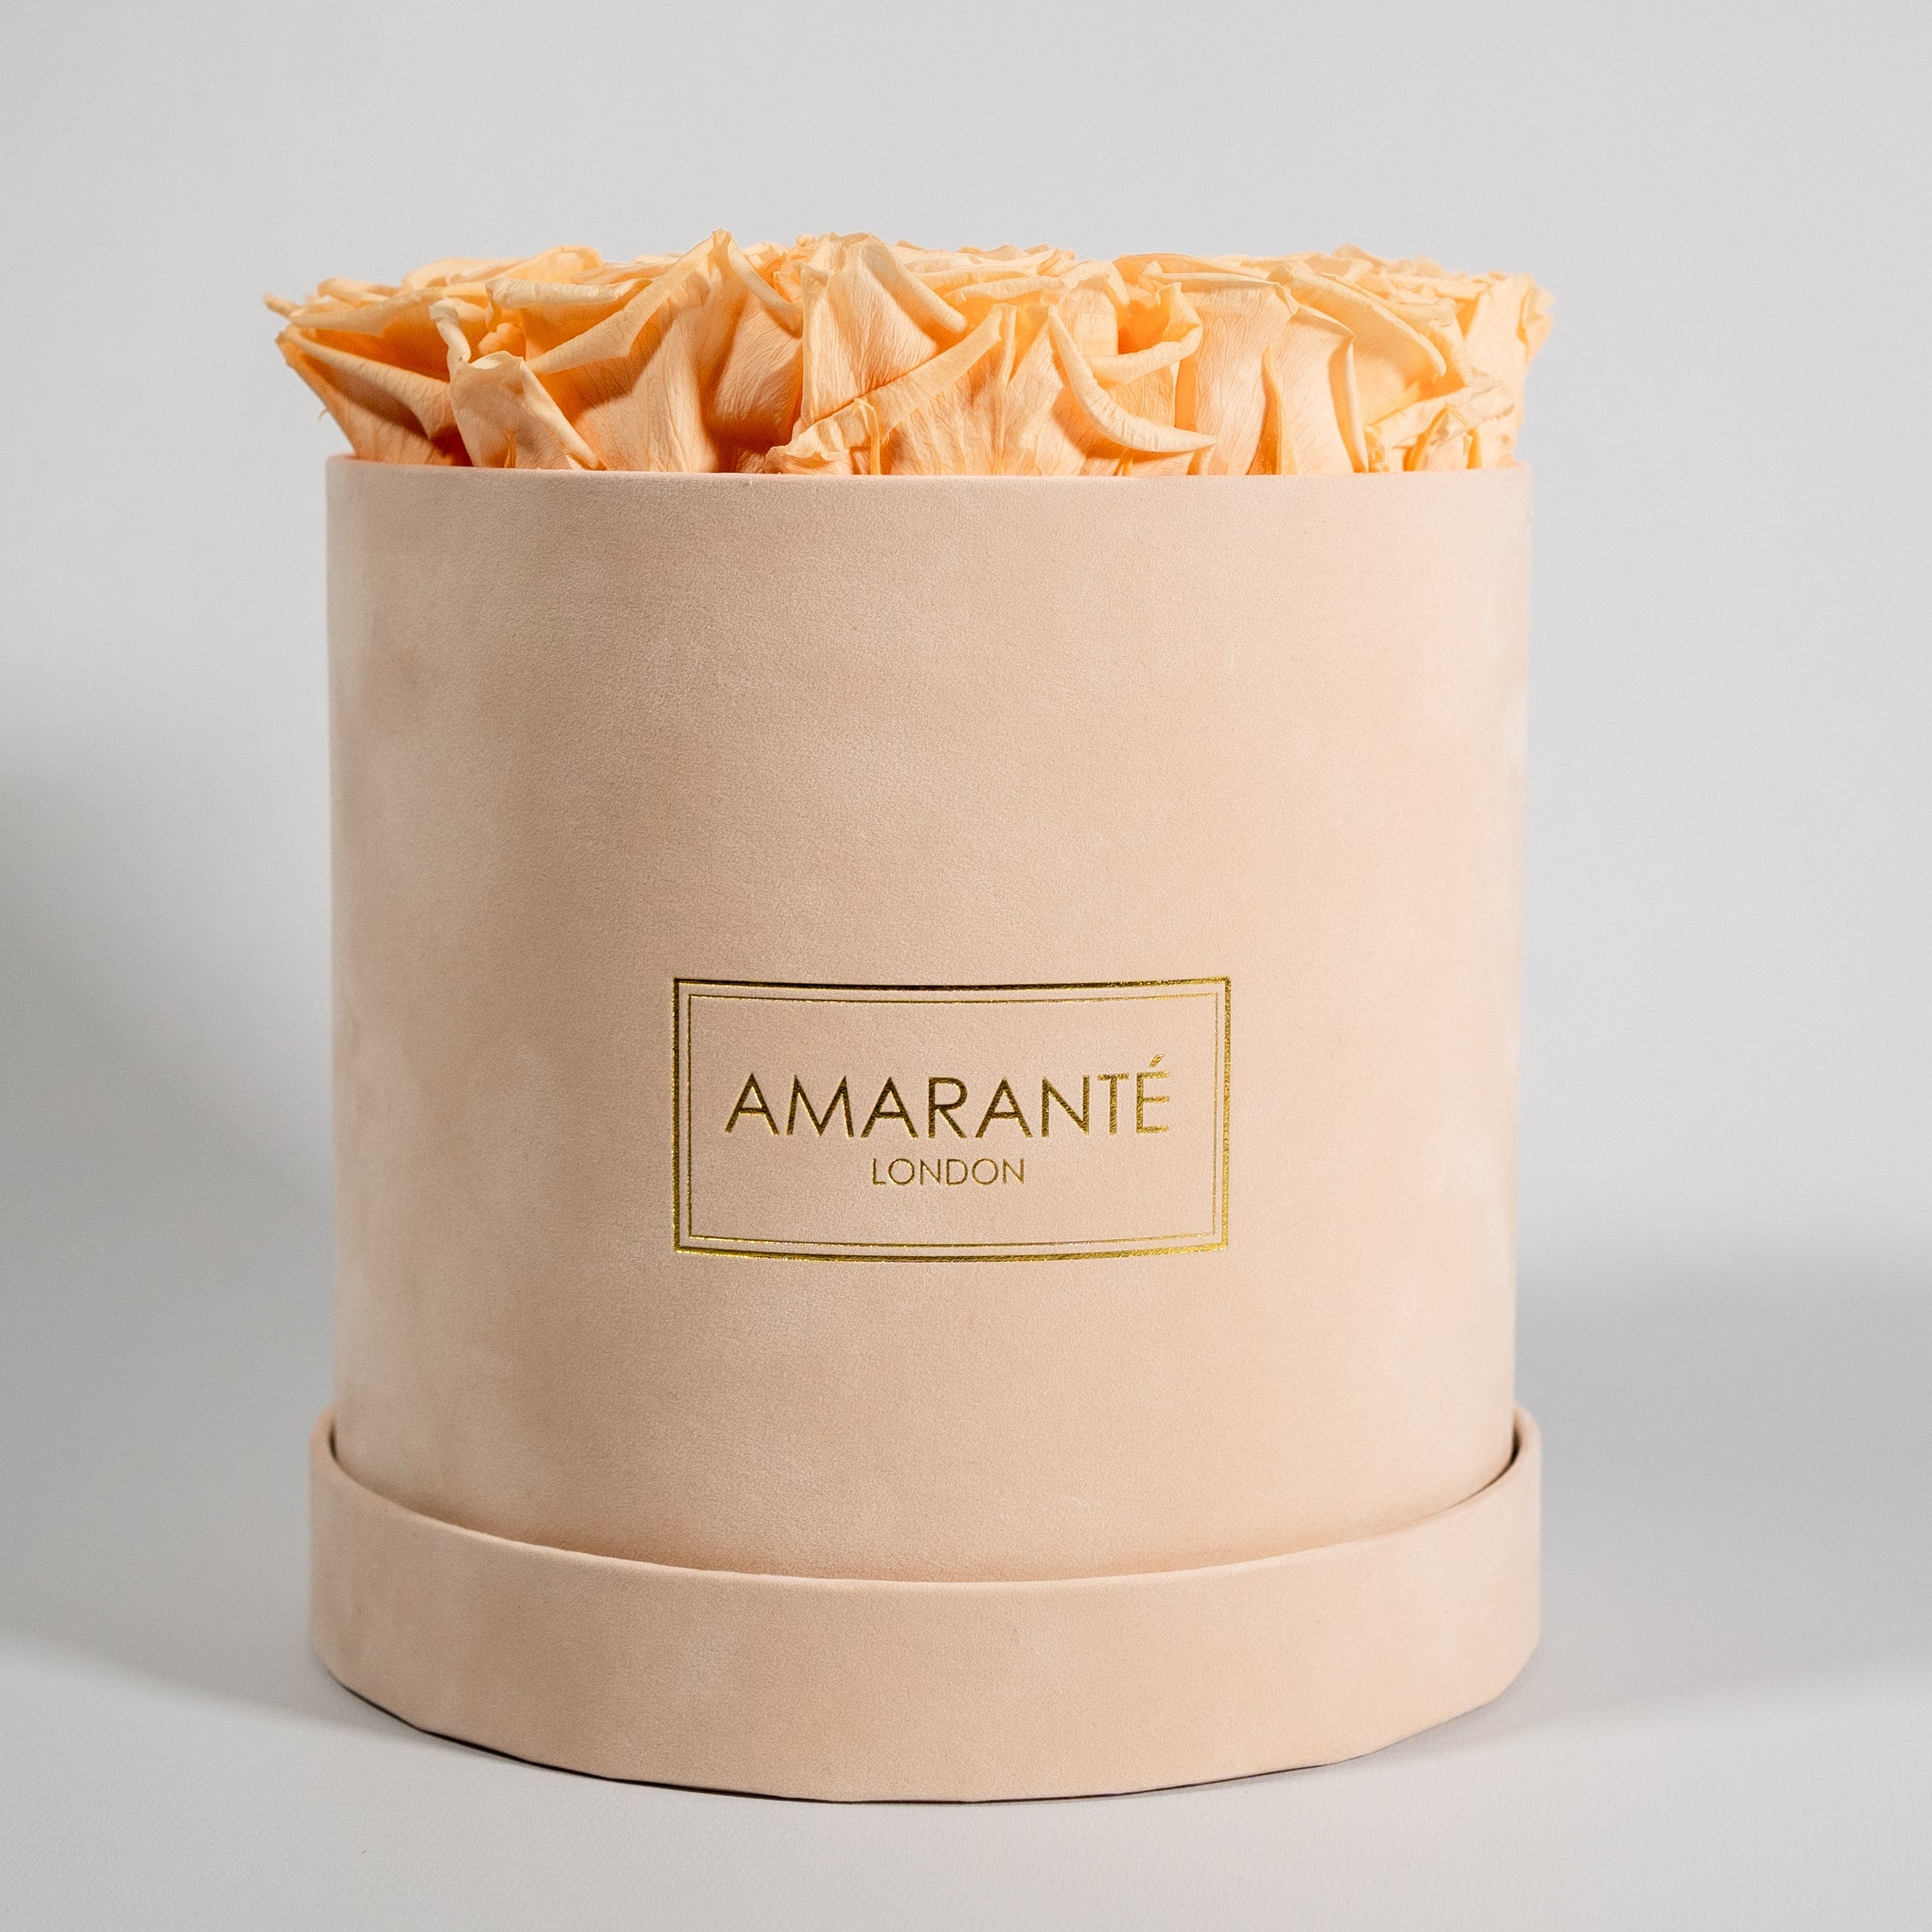 Summer-inspired peach roses displayed in a fashionable beige box. 